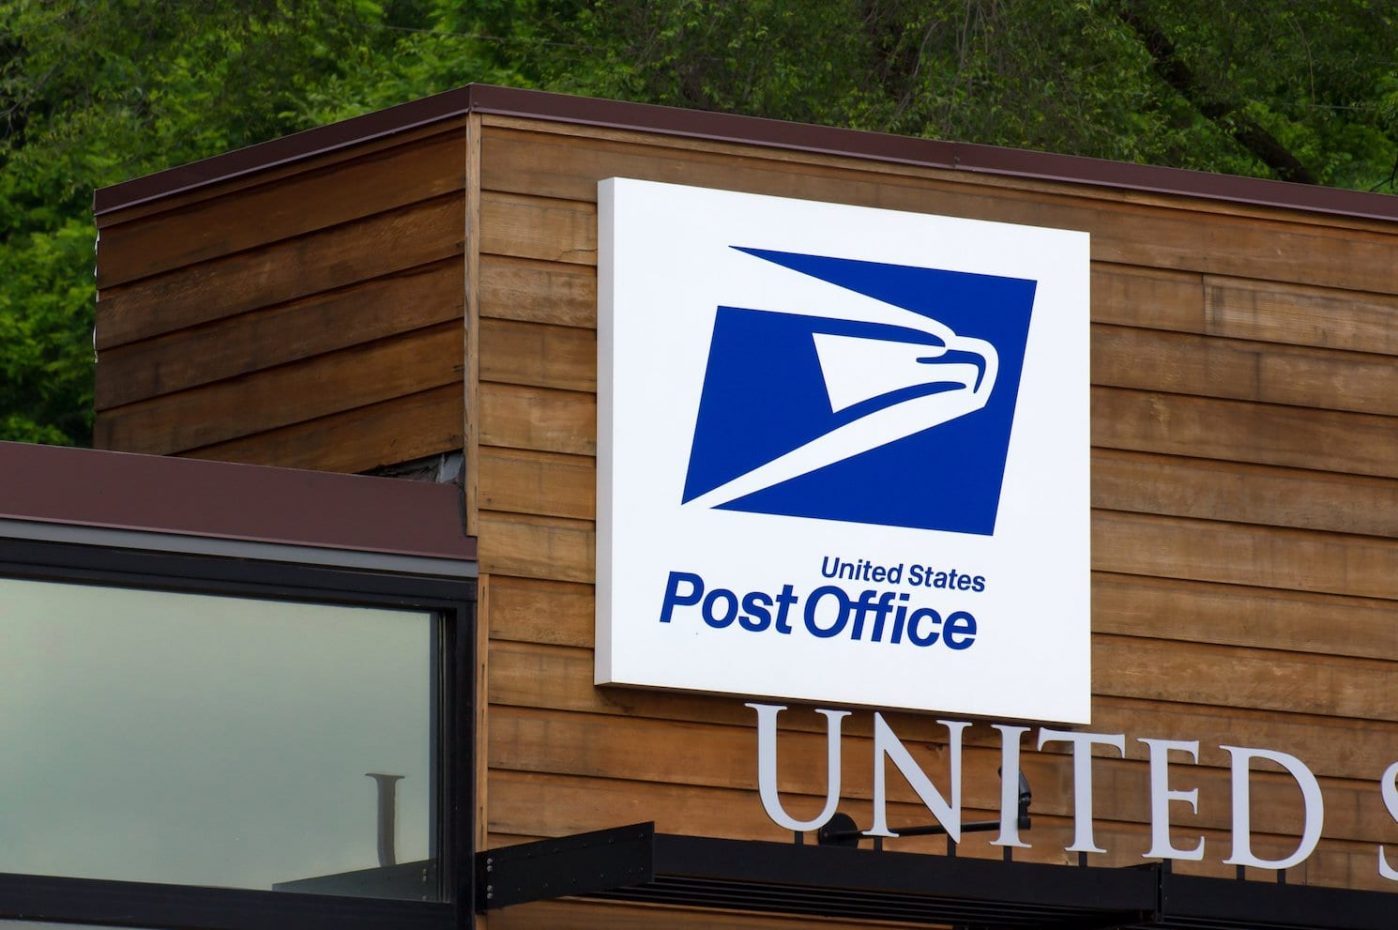 US postal chief backs down on controversial changes amid outcry